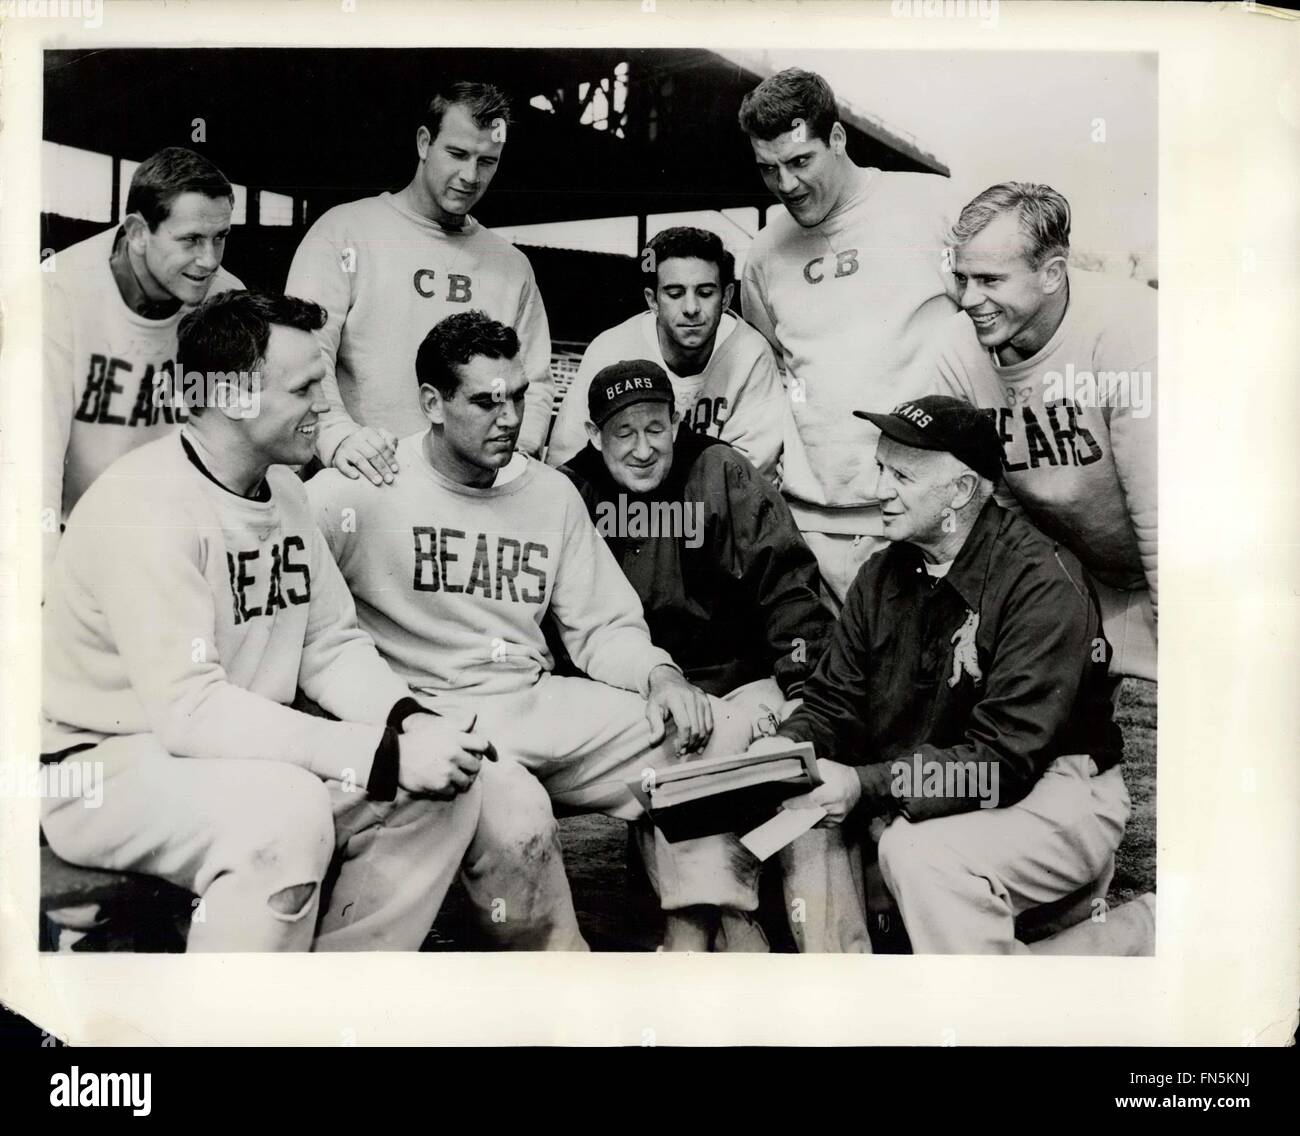 1956 - Catholic Members of Professional Football Team: Chicago: Catholic members of the Chicago ''Bears'' Professional football team get together during practice at Wrigley Field here for an ''Extra ''Skull Session'' om plays. Doing the talking is John Driscoll aka Paddy Assistant Coach (right). Others are, left to right: Seated, Bill Wightkin, George Connor, and Ed Rozy, Trainer. Standing, Bob Williams, Bob Moser, A. Campana, Jack Hoffman, and Steve Romanik, George Halas, head of coach of the team (not shown), also is a Catholic. © Keystone Pictures USA/ZUMAPRESS.com/Alamy Live News Stock Photo